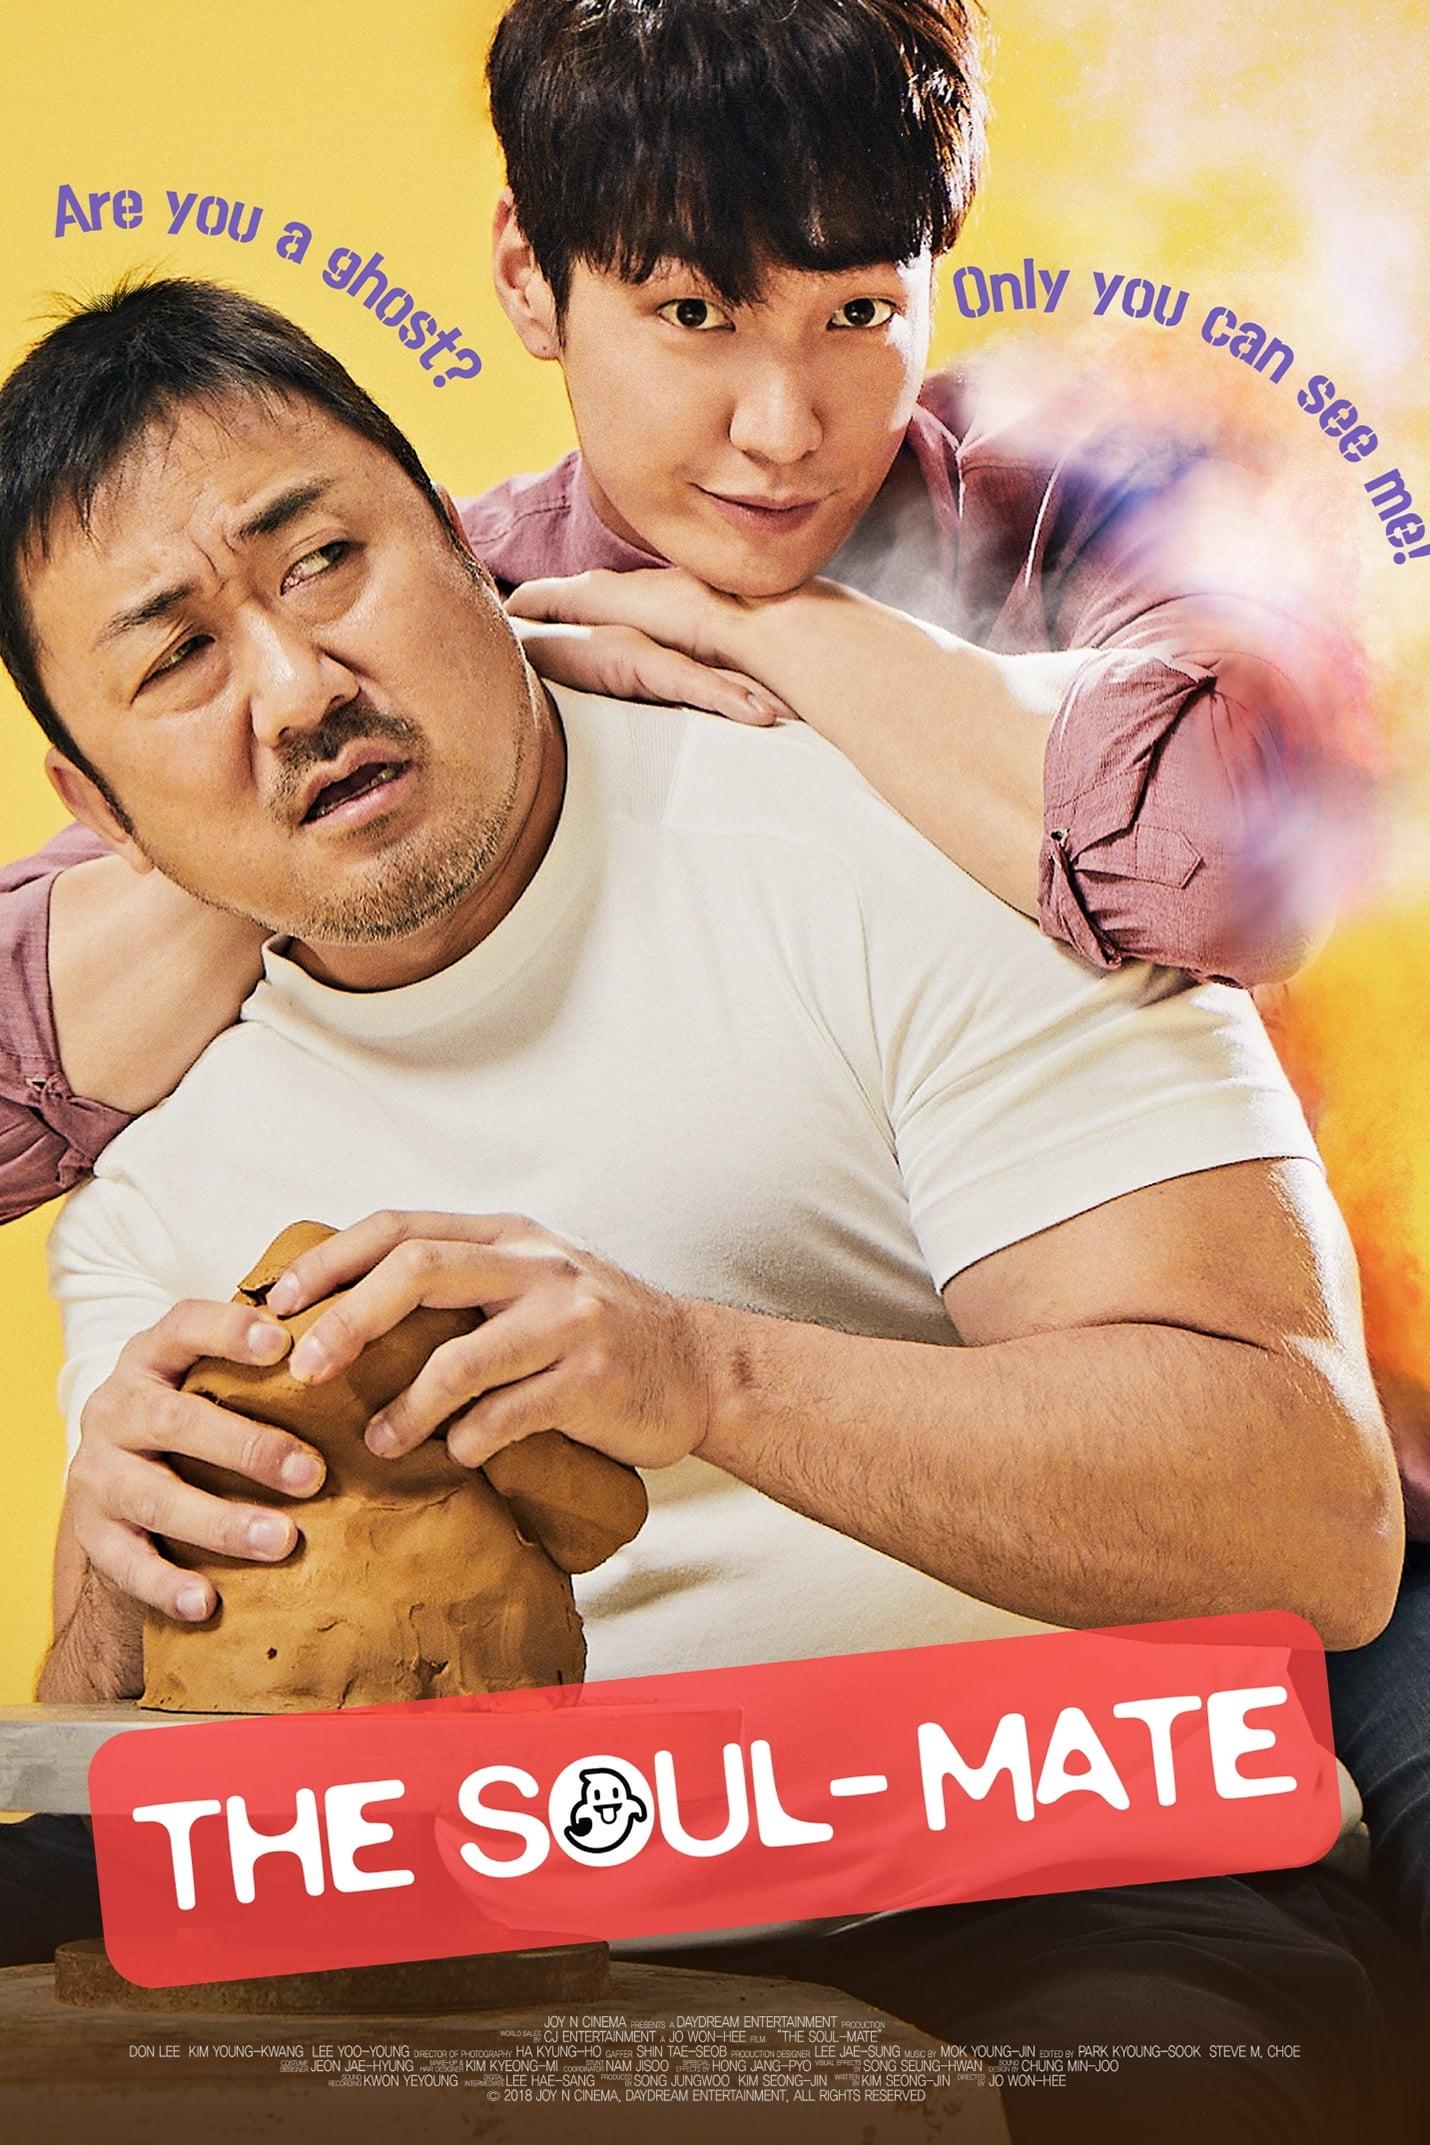 The Soul-Mate poster